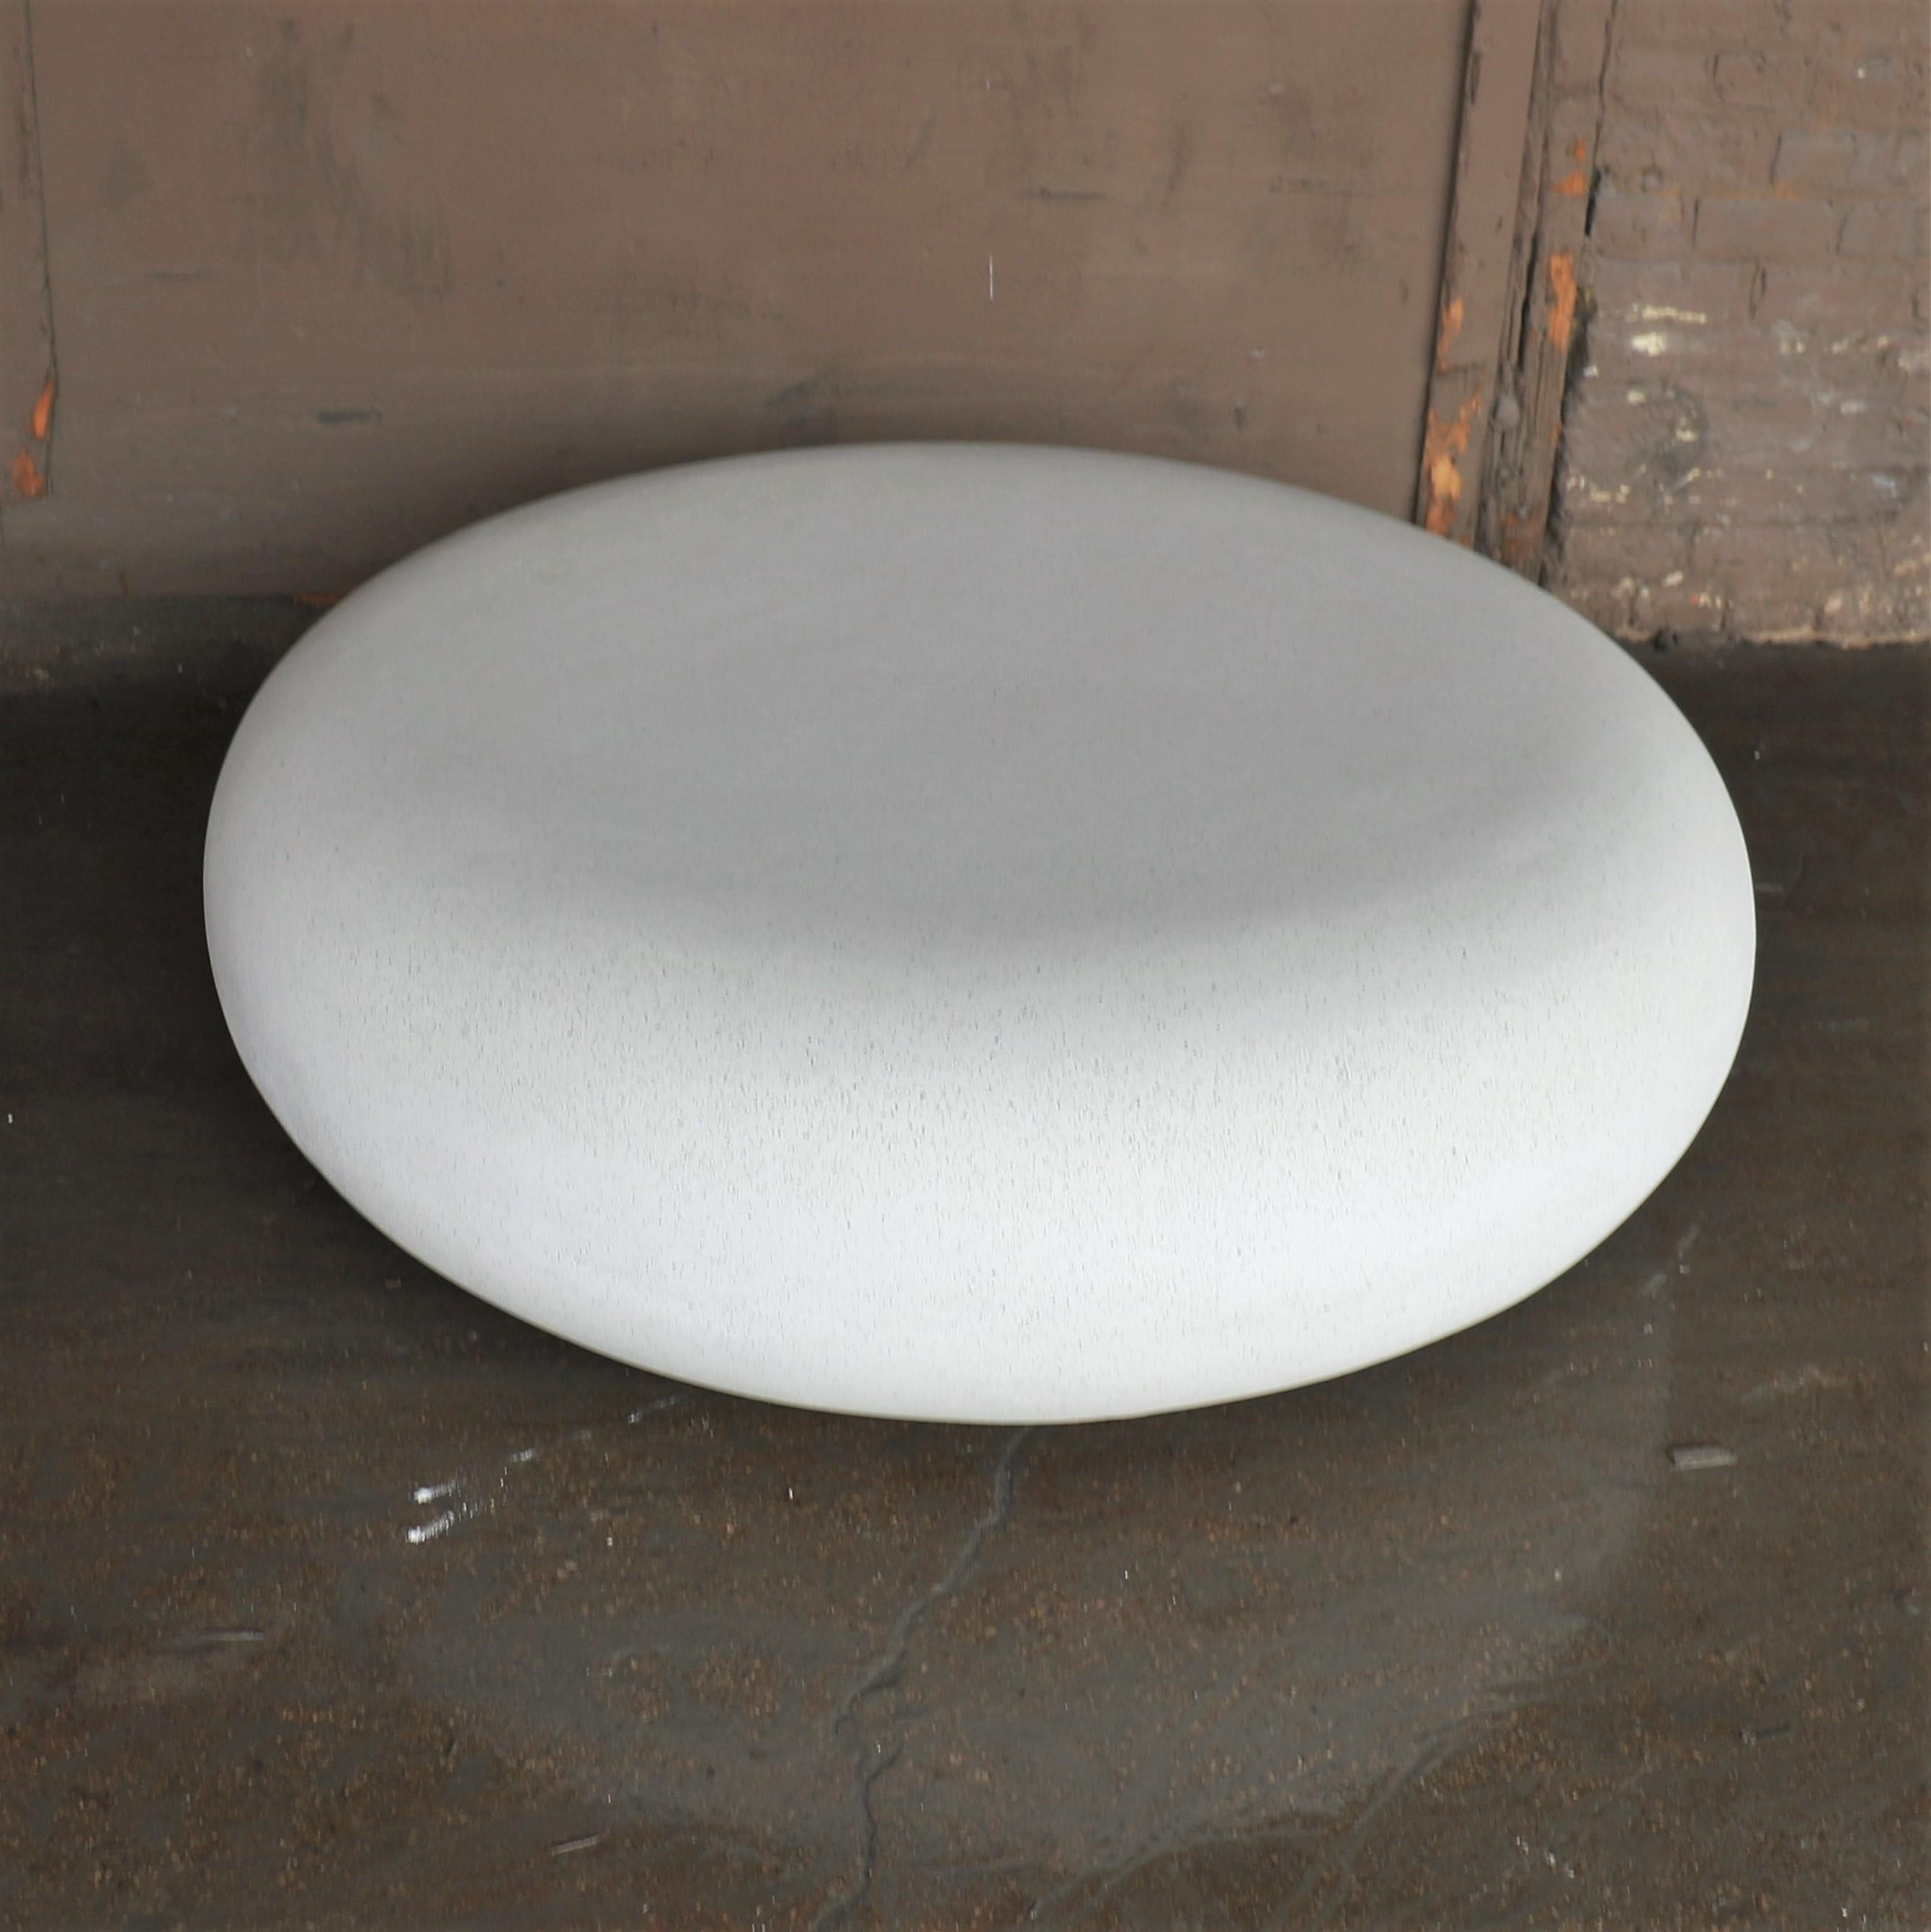 Like a stone from a stream, smoothed for millennia by the passing currents. The fluid potential of natural power emanates from its presence.

Dimensions: Diameter 48 in. (122 cm). Height 15 in. (38 cm). Weight 70 lbs. (32 kg).

Finish color